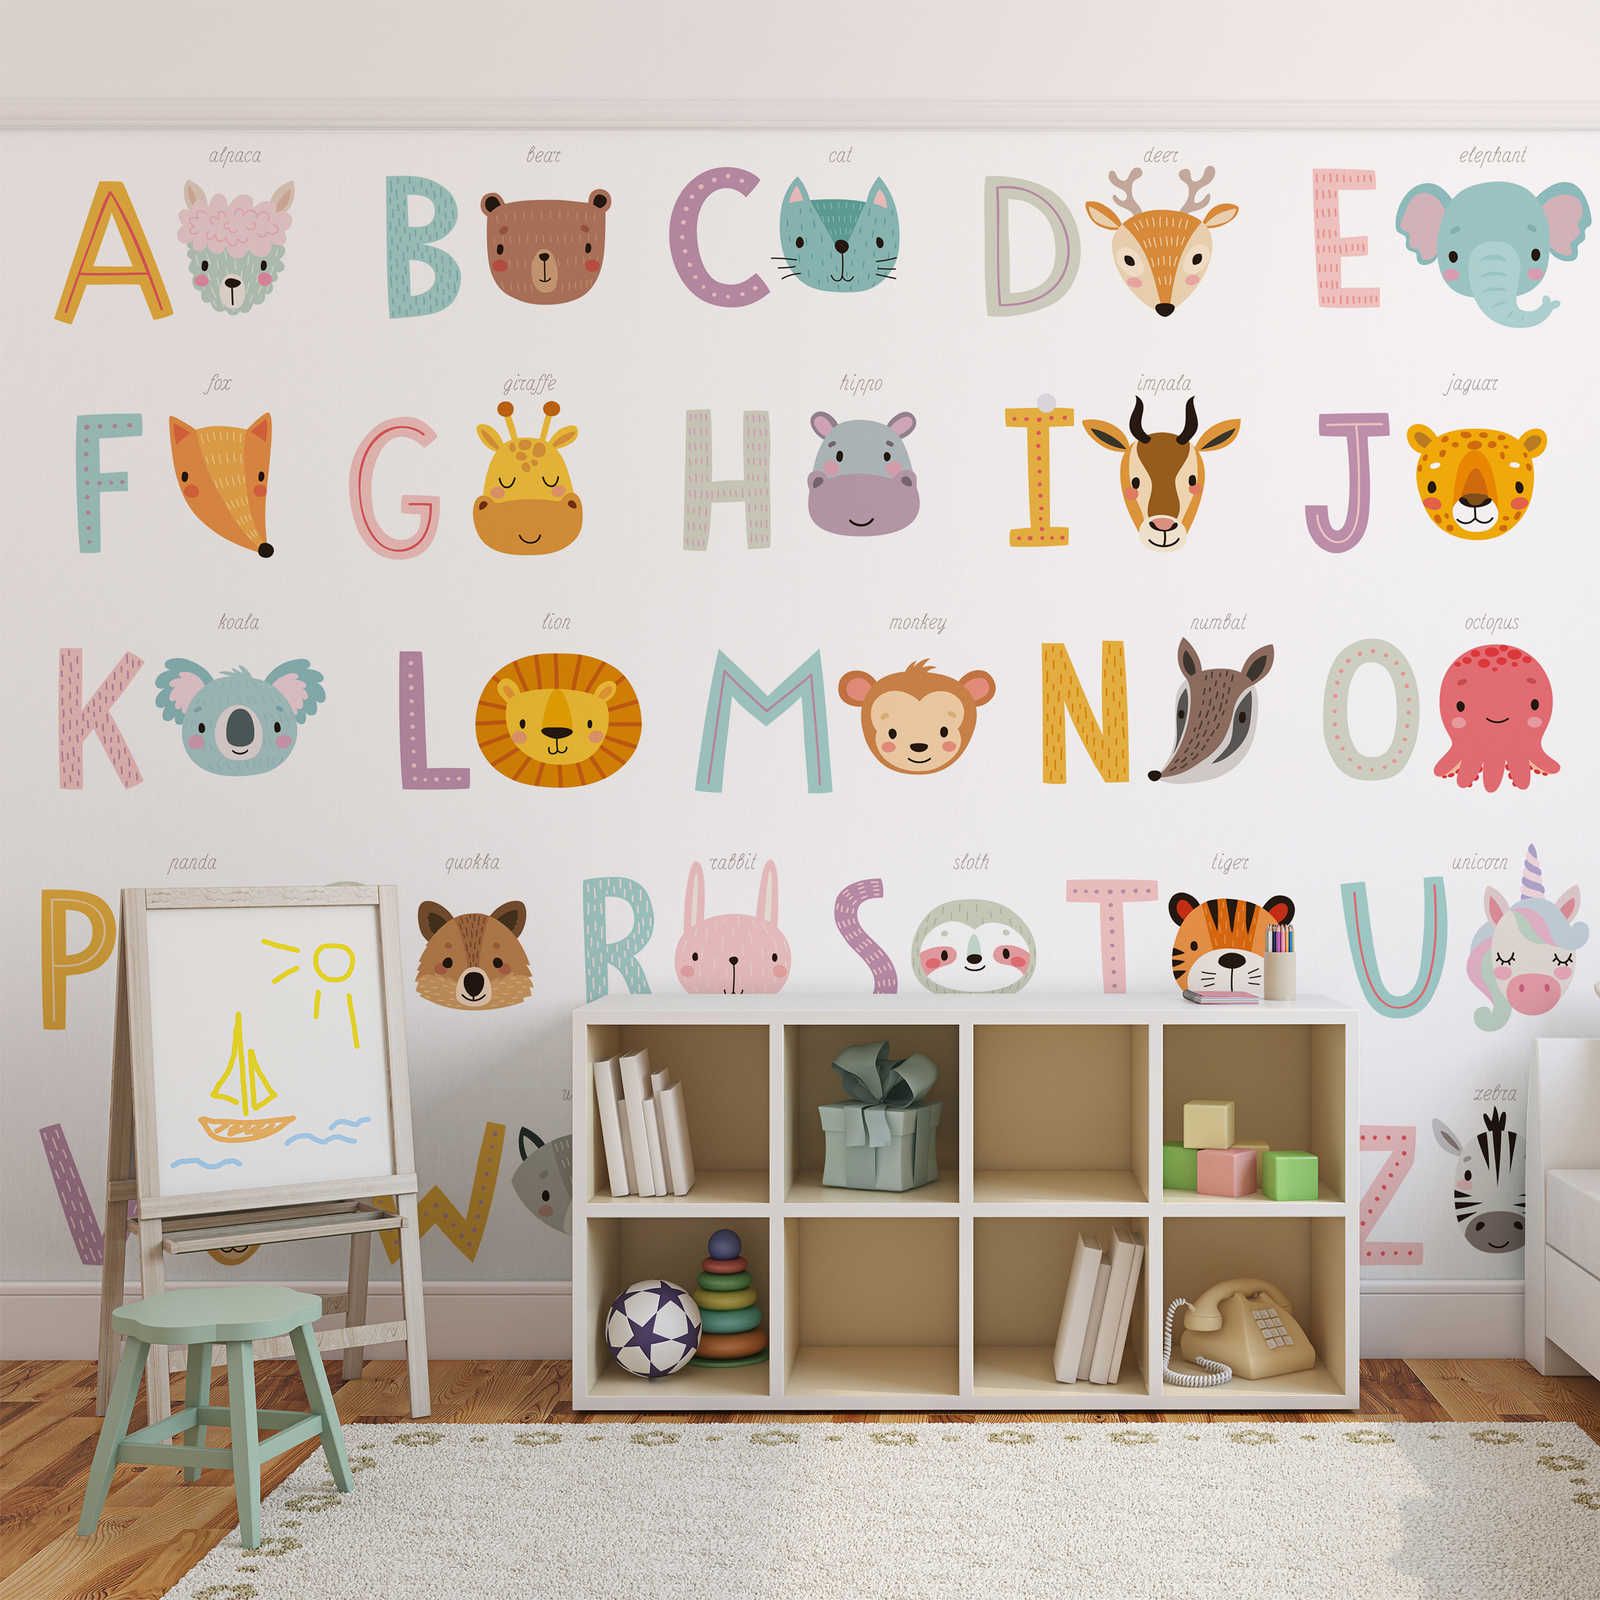 Photo wallpaper ABC with animals and animal names - Smooth & pearlescent fleece
